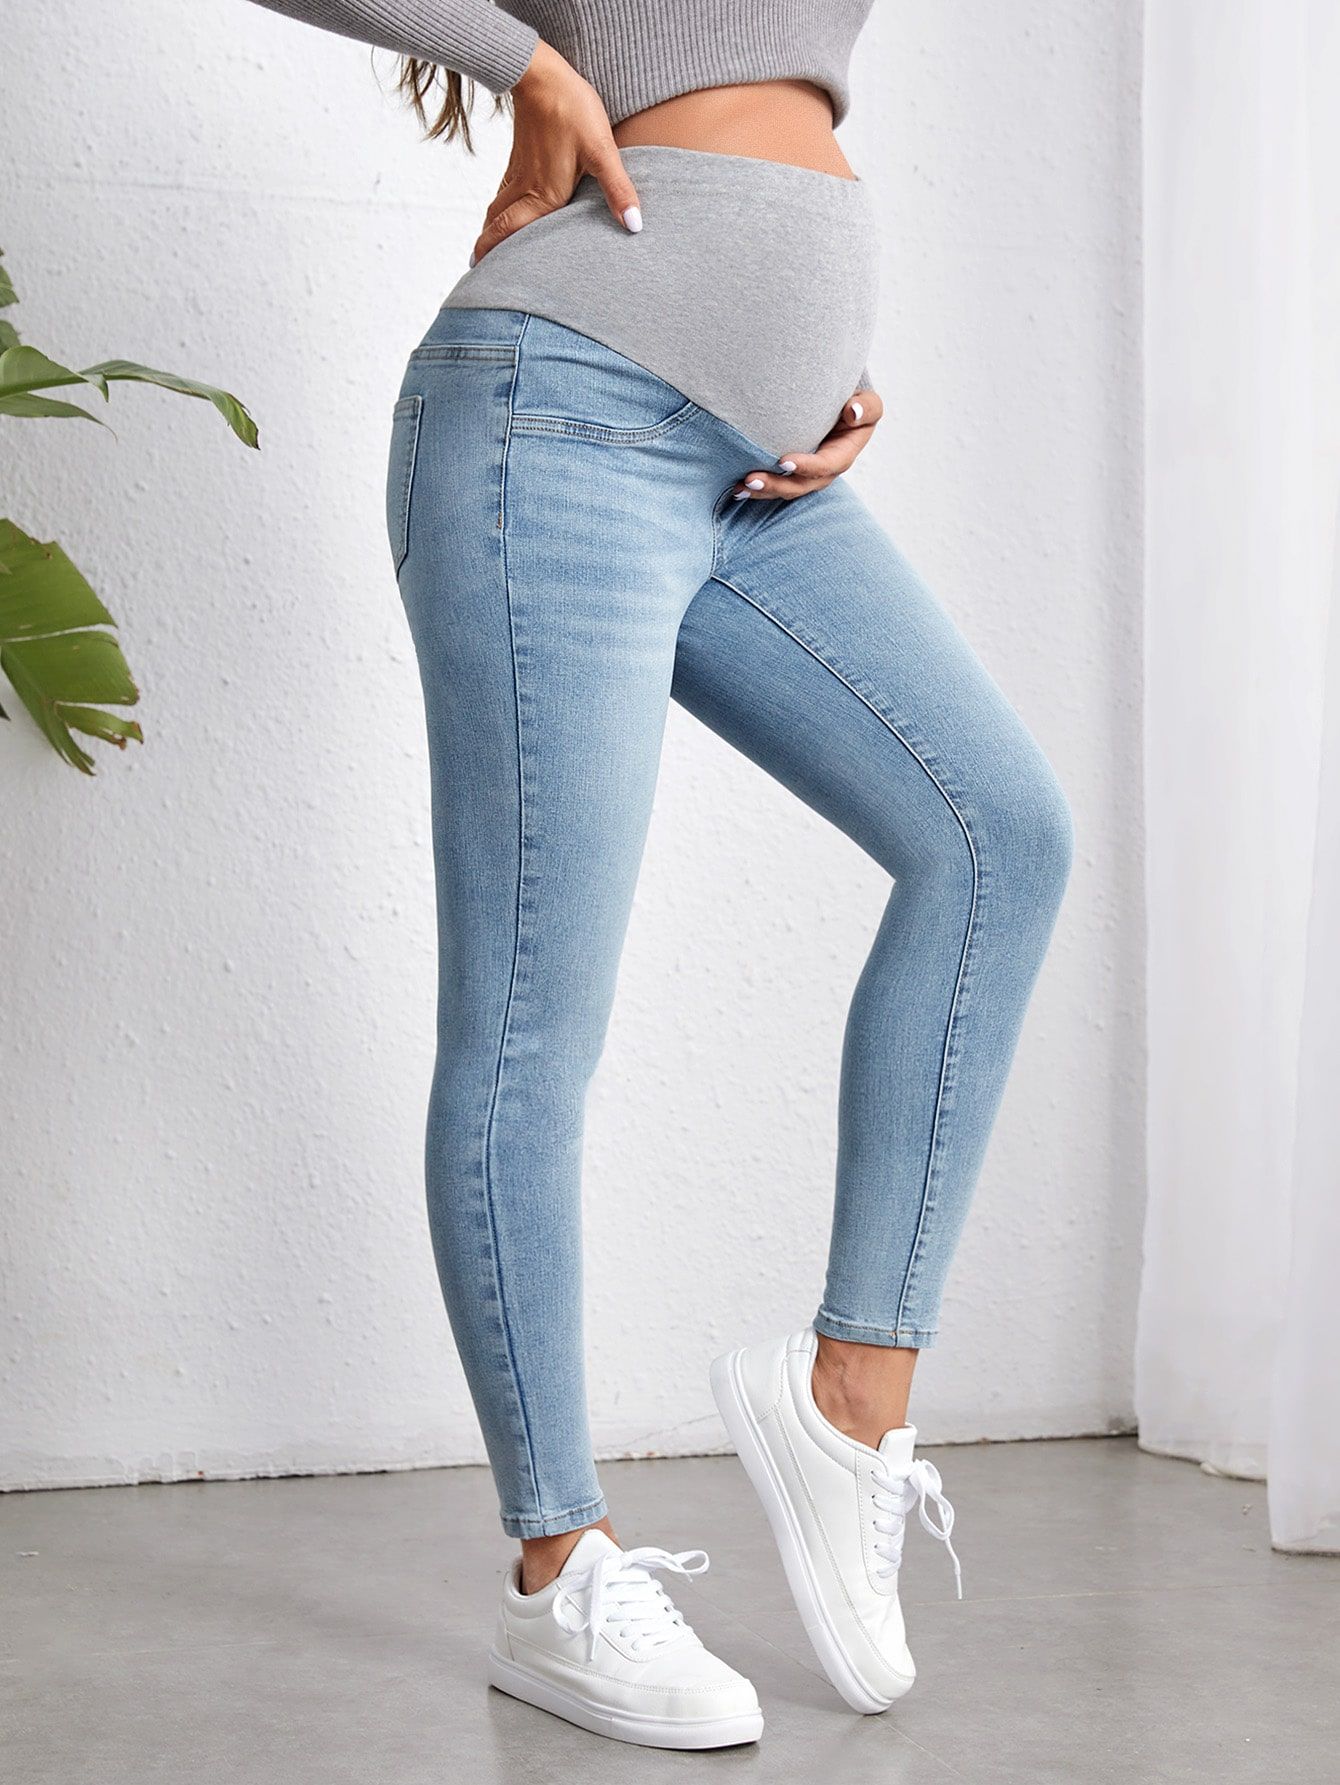 The Best Maternity Jeans for Every Body
Type